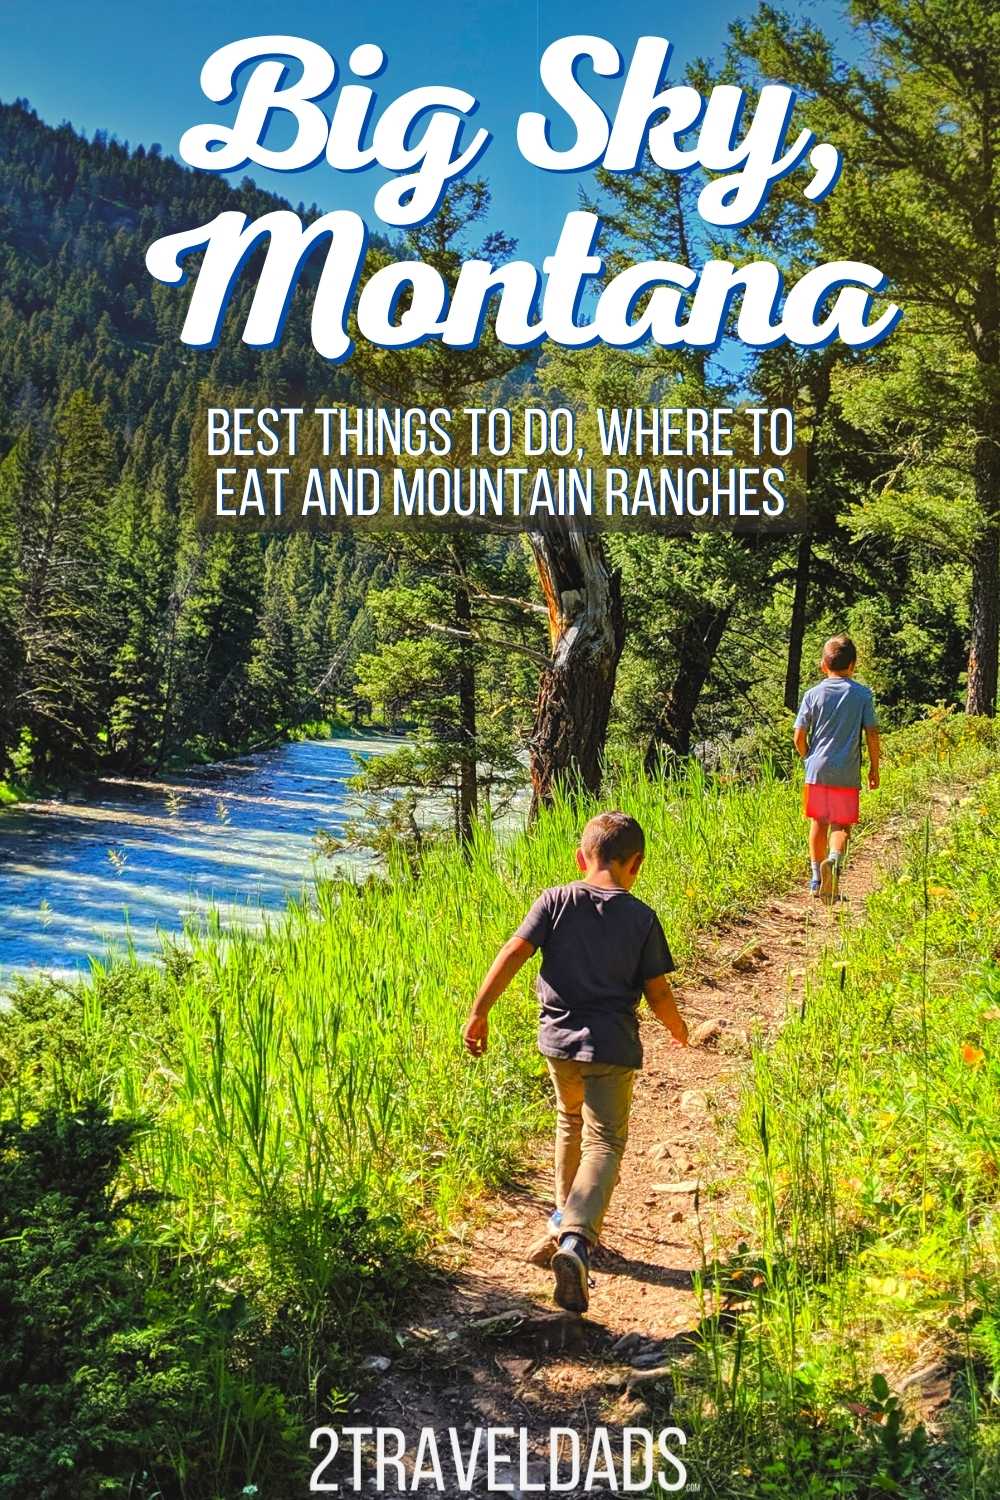 Big Sky Montana is full of things to do besides skiing. Summer weather is great for visiting Yellowstone, hiking trails to waterfalls, horseback riding, the best BBQ in Montana and more. Very nice resorts and lodging.